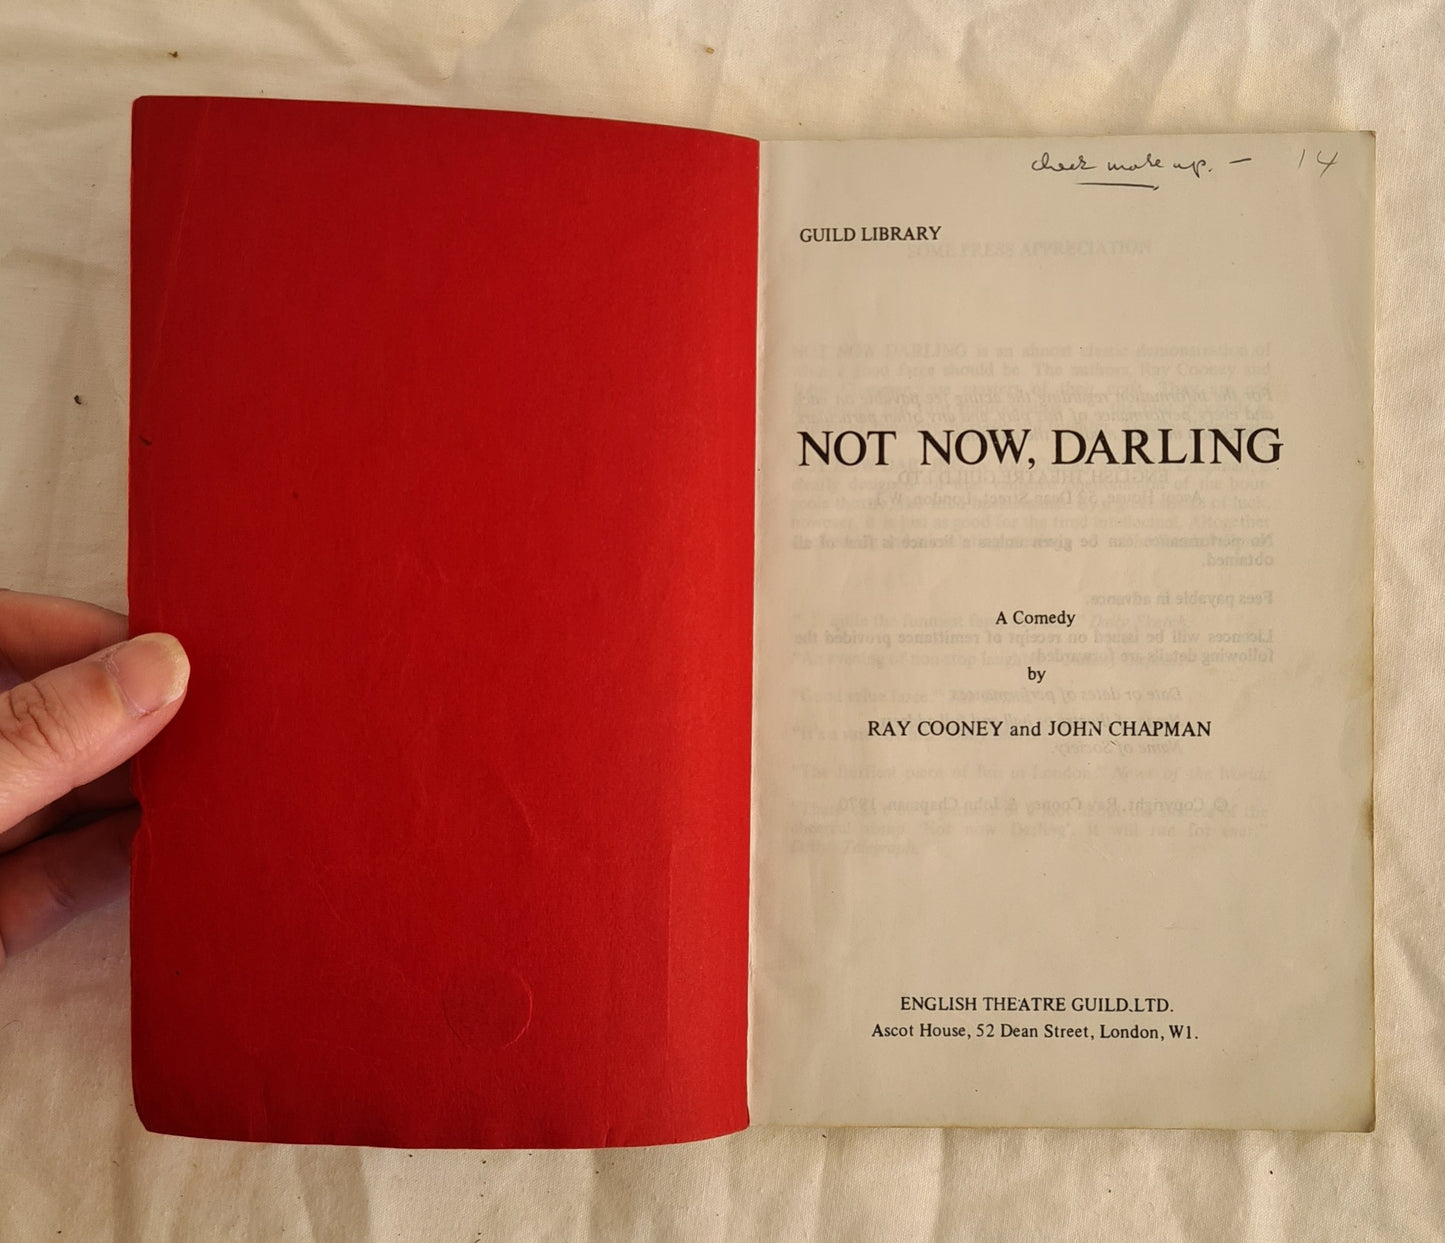 Not Now, Darling by Ray Cooney and John Chapman